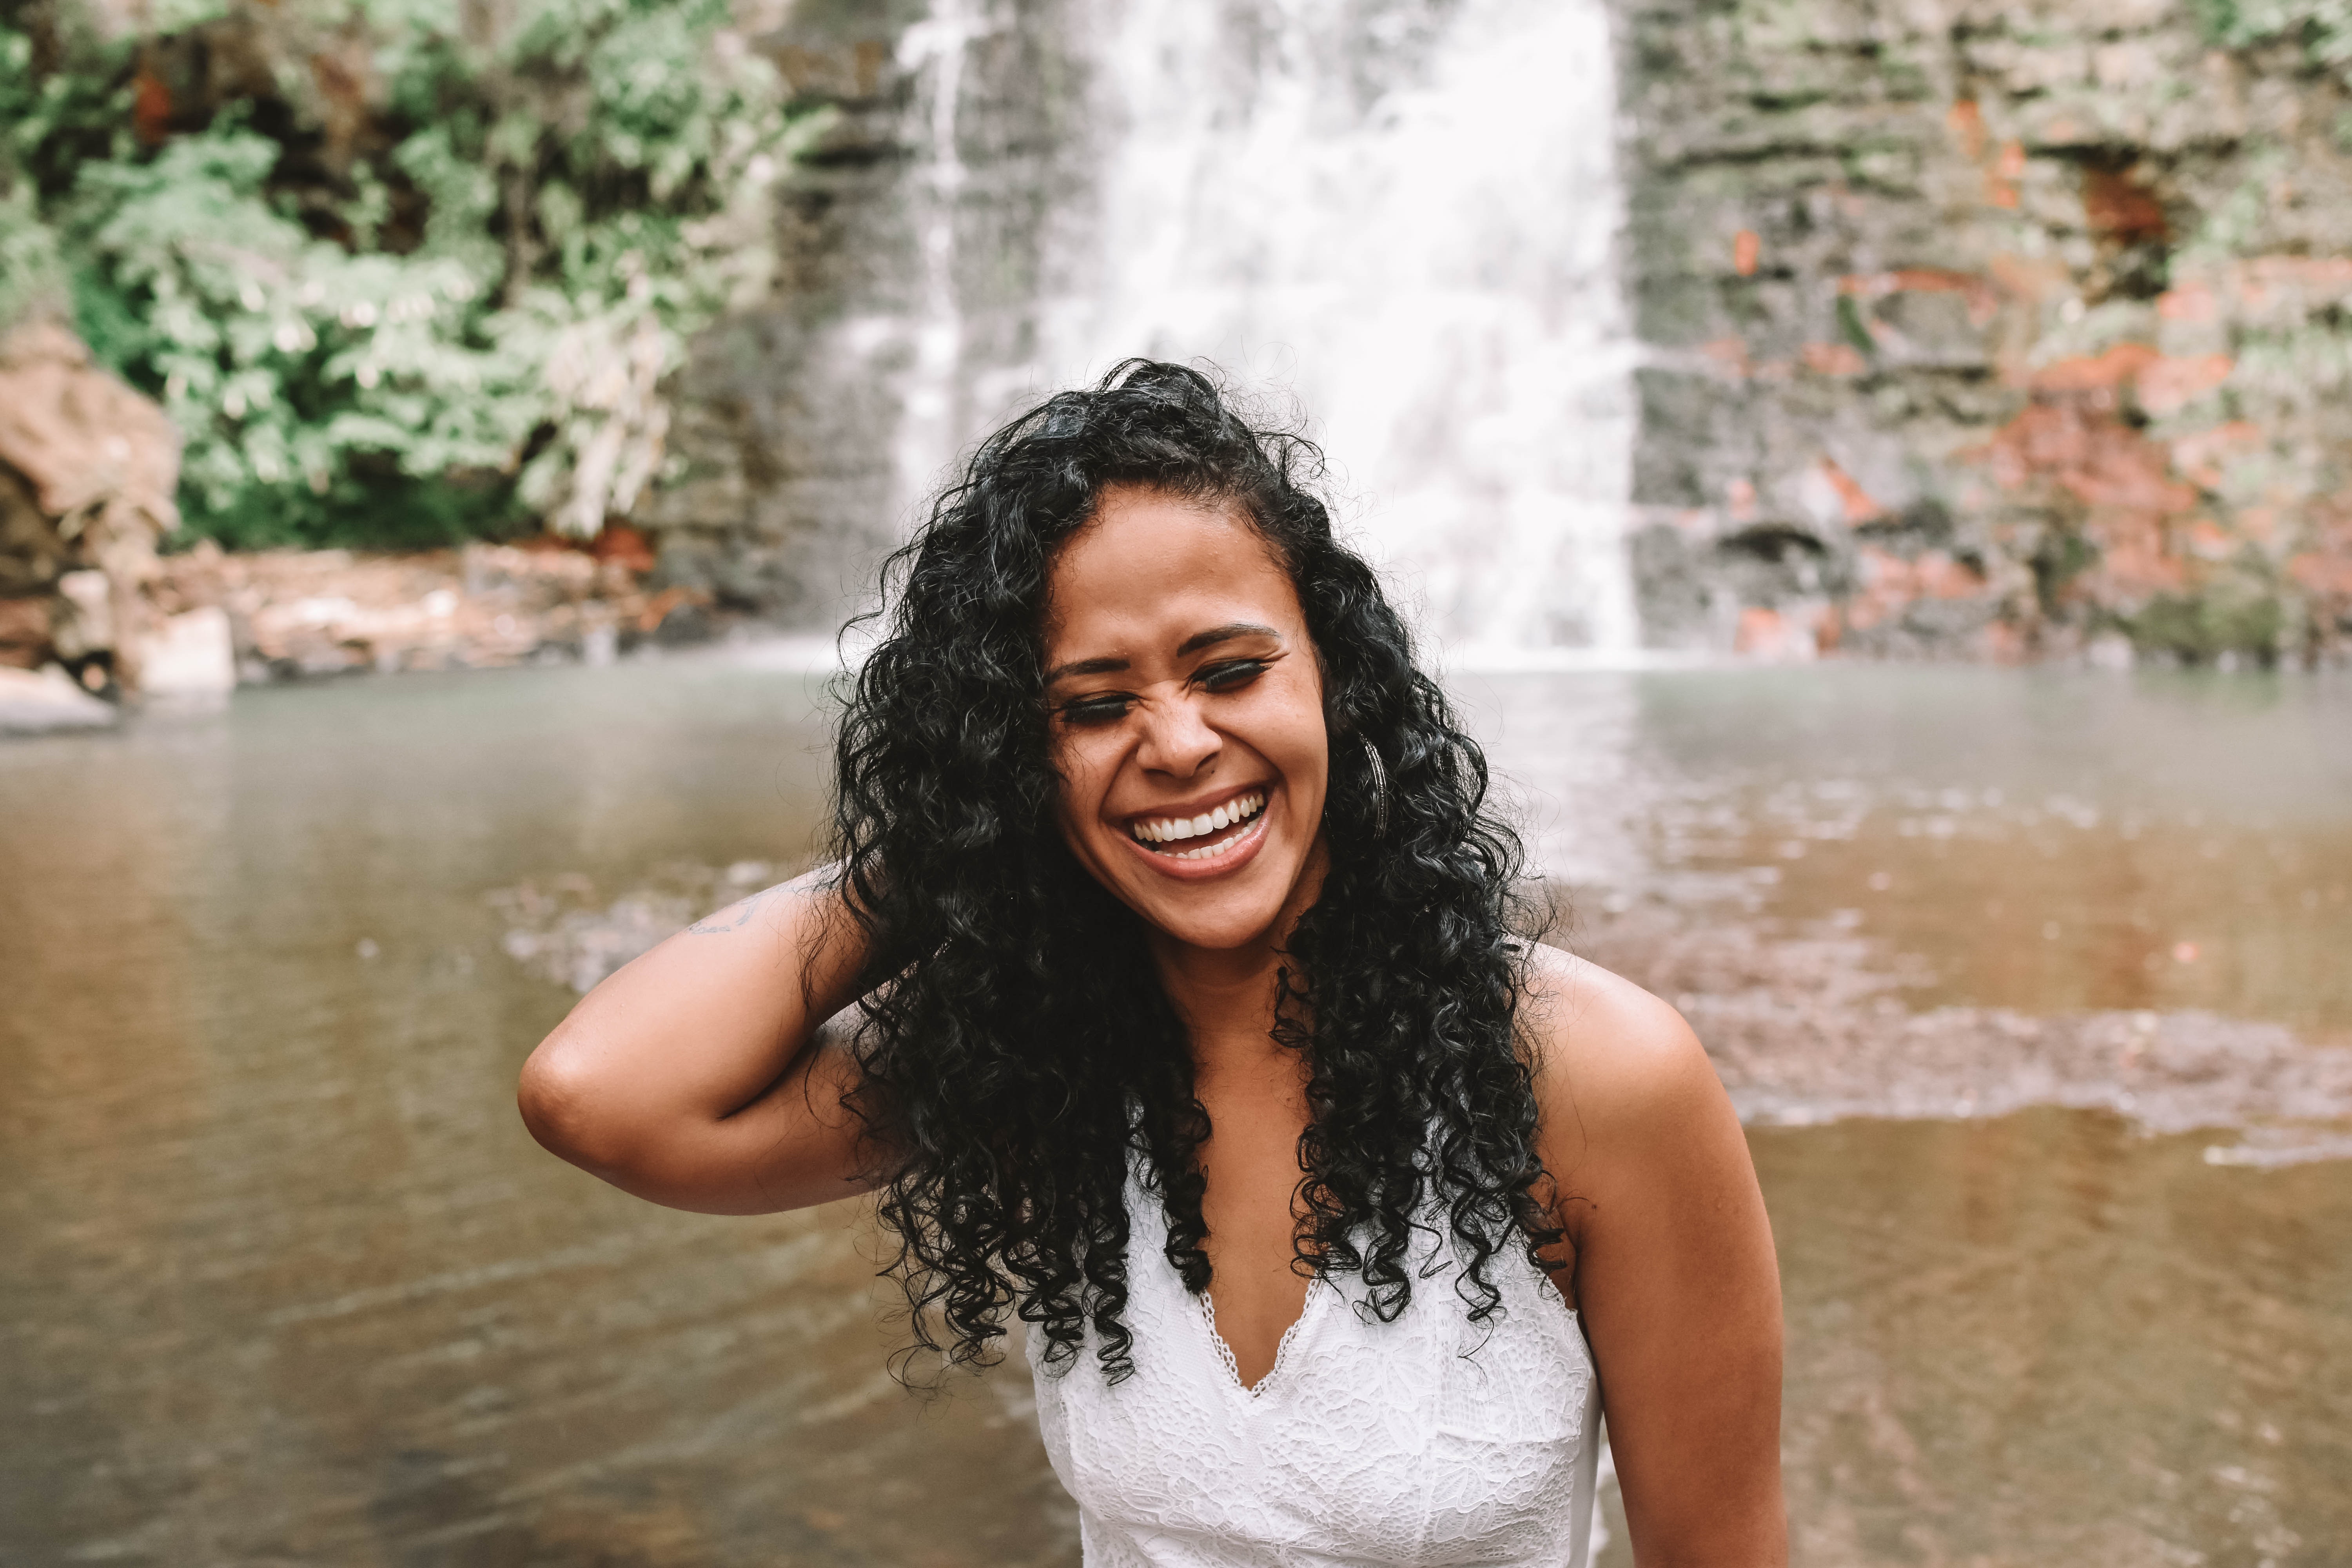 Happy woman in front of a waterfall. | Source: Pexels